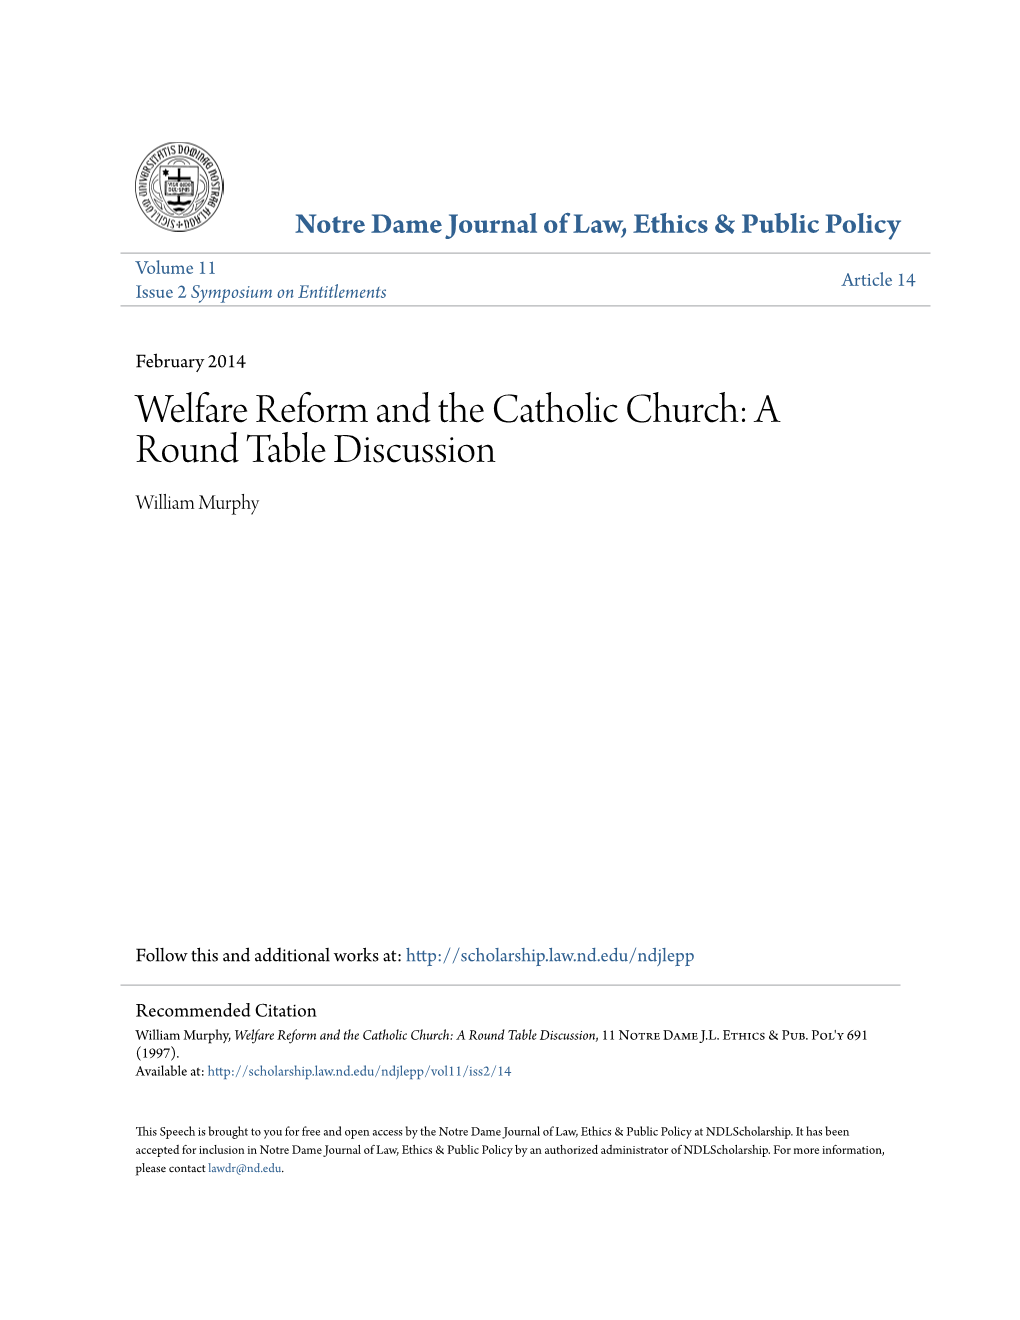 Welfare Reform and the Catholic Church: a Round Table Discussion William Murphy